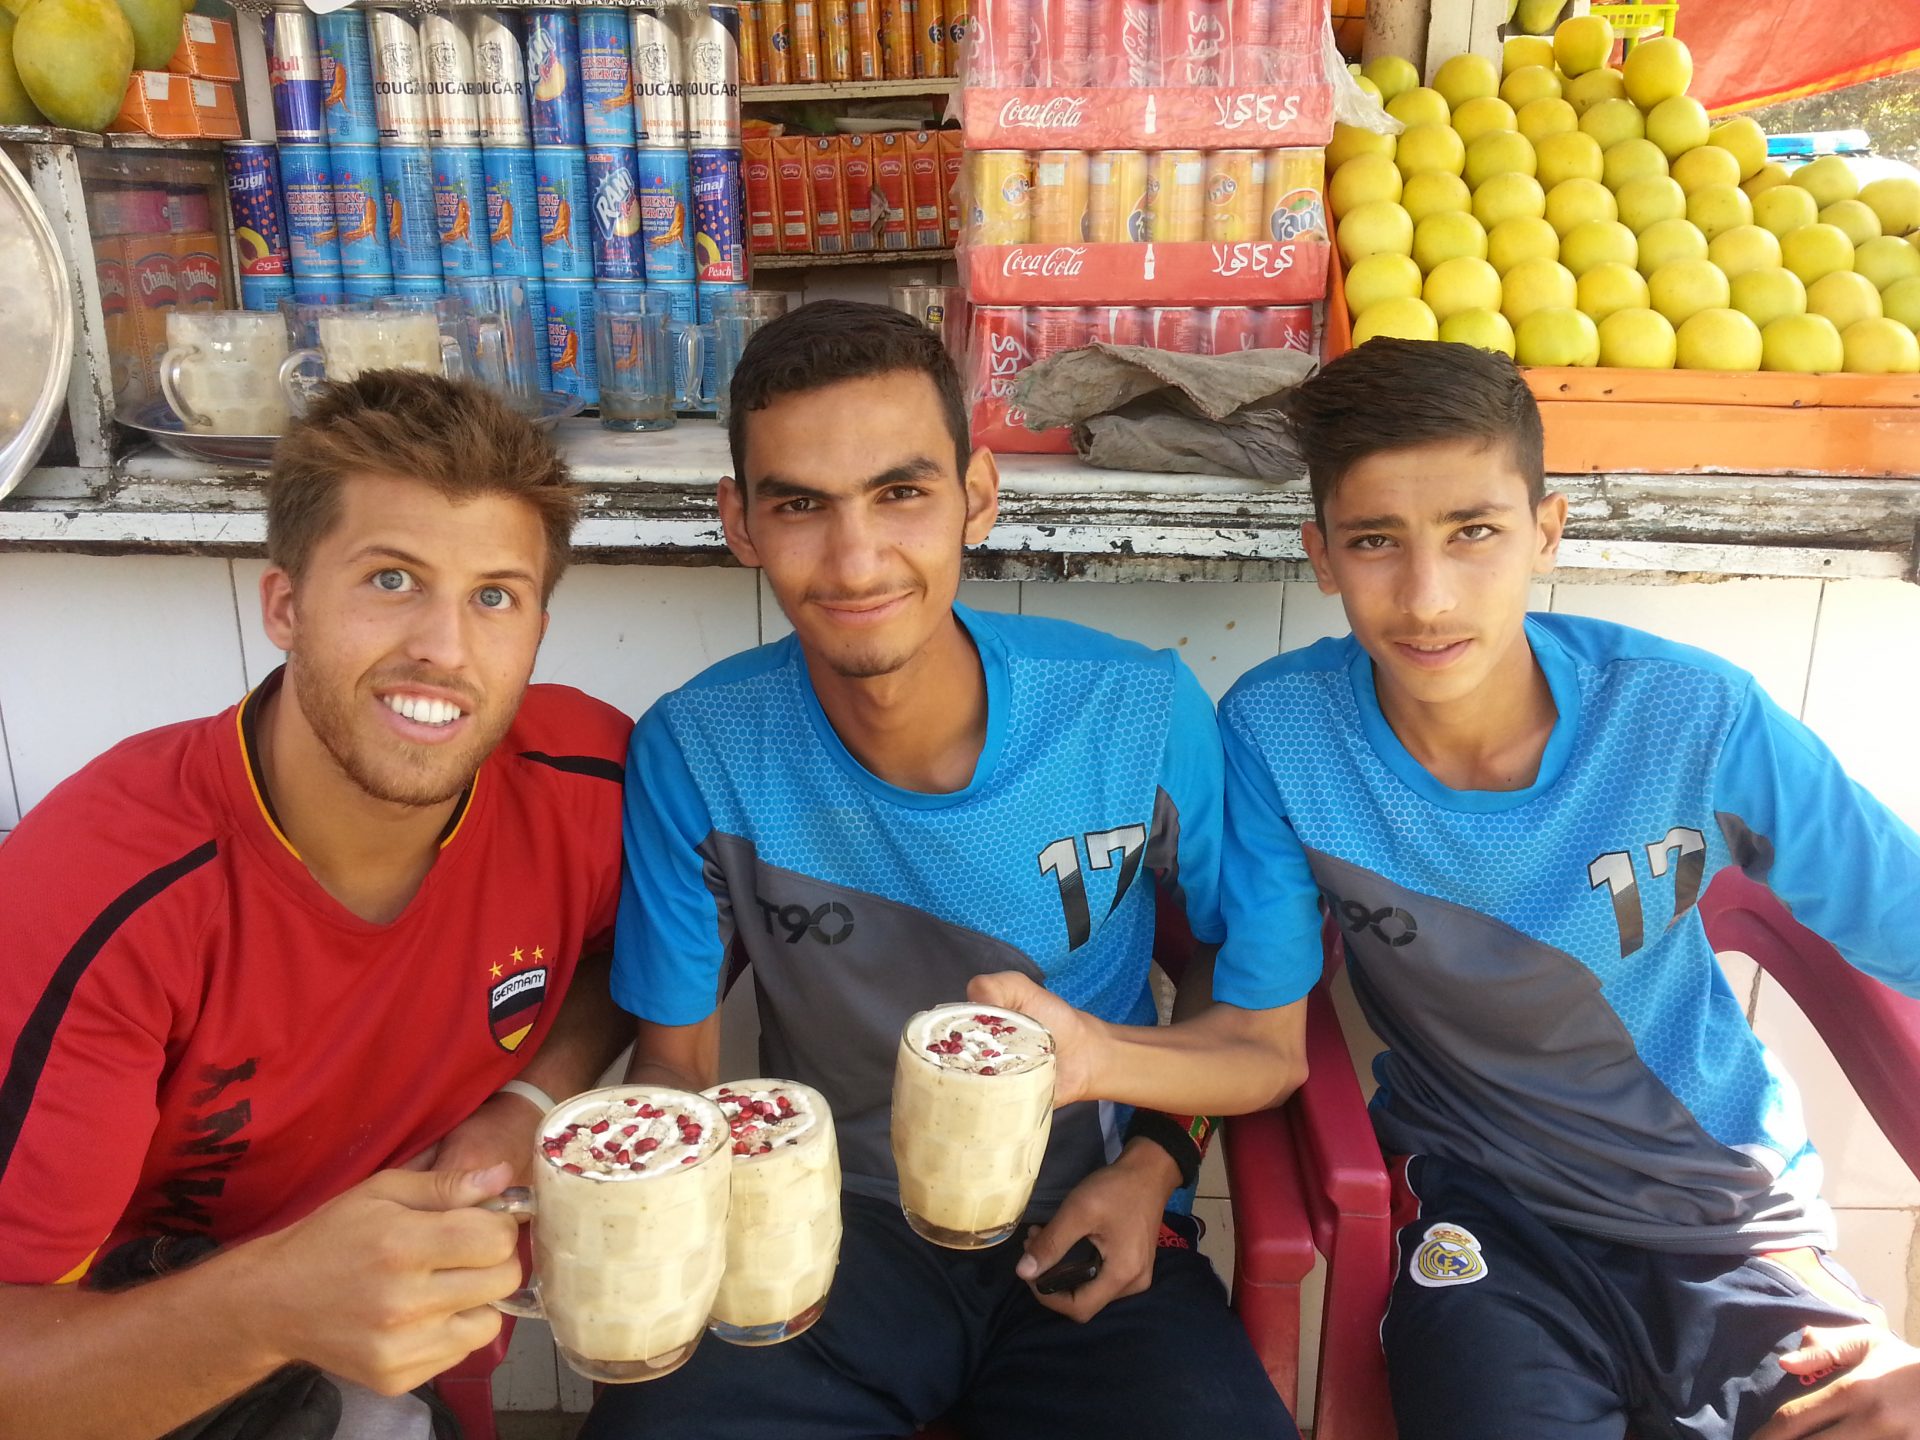 Getting banana smoothies after a day of futsal. 